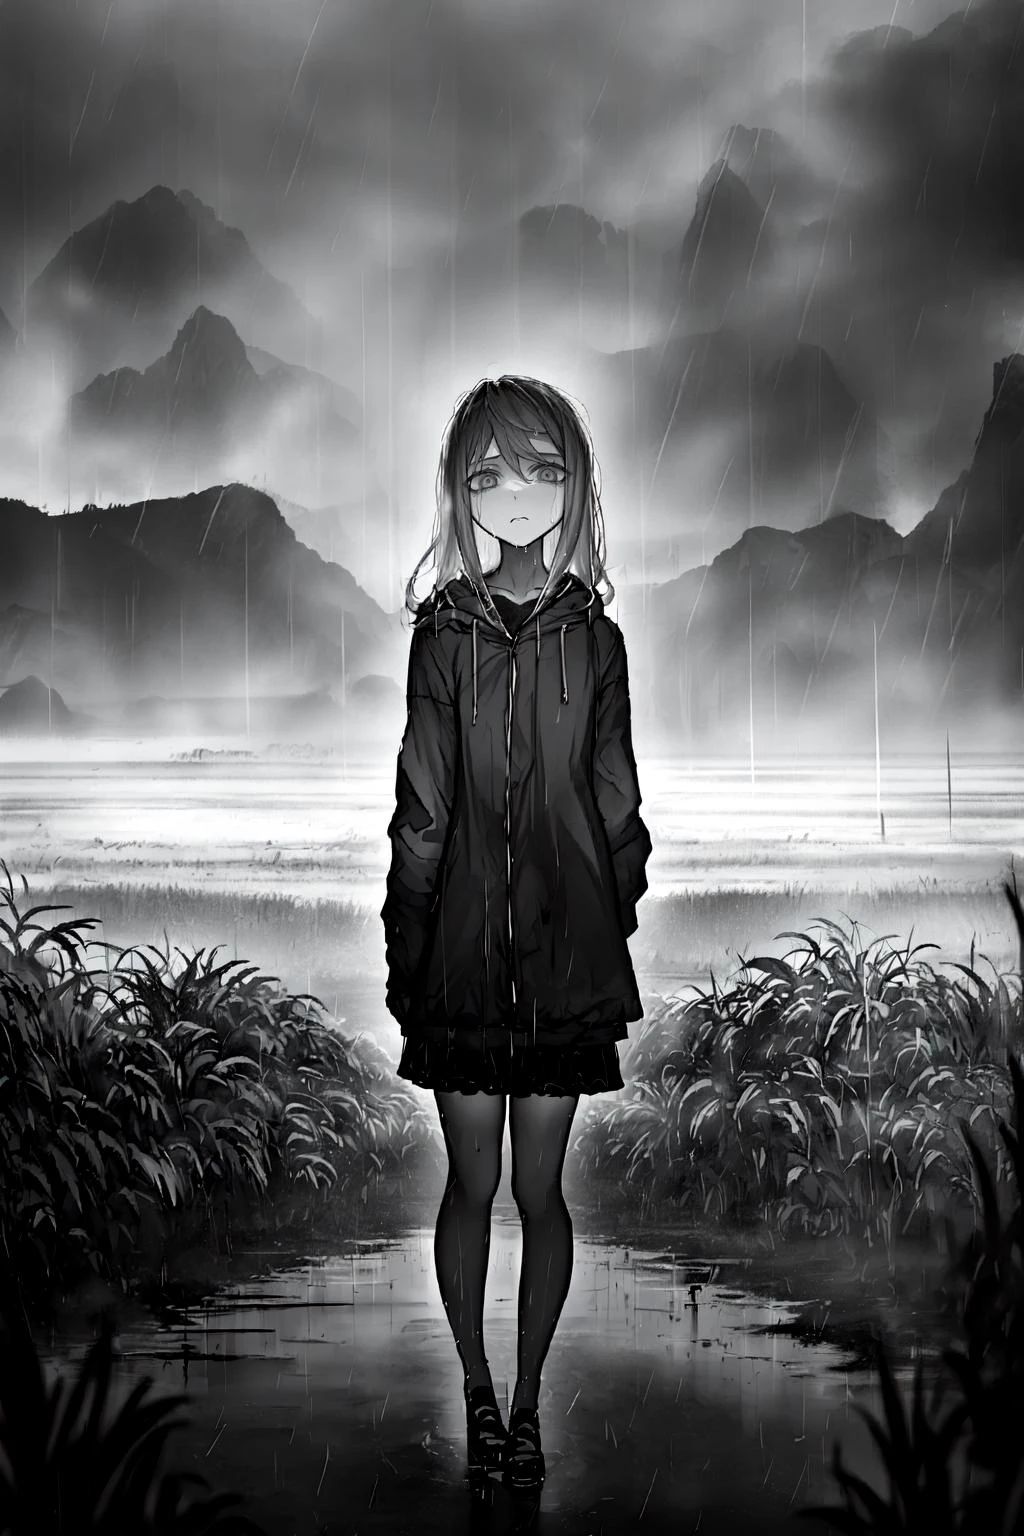 ((masterpiece)),((best quality)),8k,high detailed,ultra-detailed,intricate detail,((1girl))ï¼ (melancholic:1.2), (gloomy atmosphere:1.1), standing alone in a desolate, mist-covered landscape, (sad expression:1.2), (teary-eyed), (soft lighting:1.1), creating a poignant and emotional scene, (pastel colors:1.1), muted and subdued color palette, (loneliness:1.2), (wind-blown hair), (flowing:1.1), (rain:1.2), gentle raindrops adding to the melancholy, (umbrella:1.1), held tightly, (kawaii:0.8), combining sadness with a touch of cuteness, (introspective:1.1), 